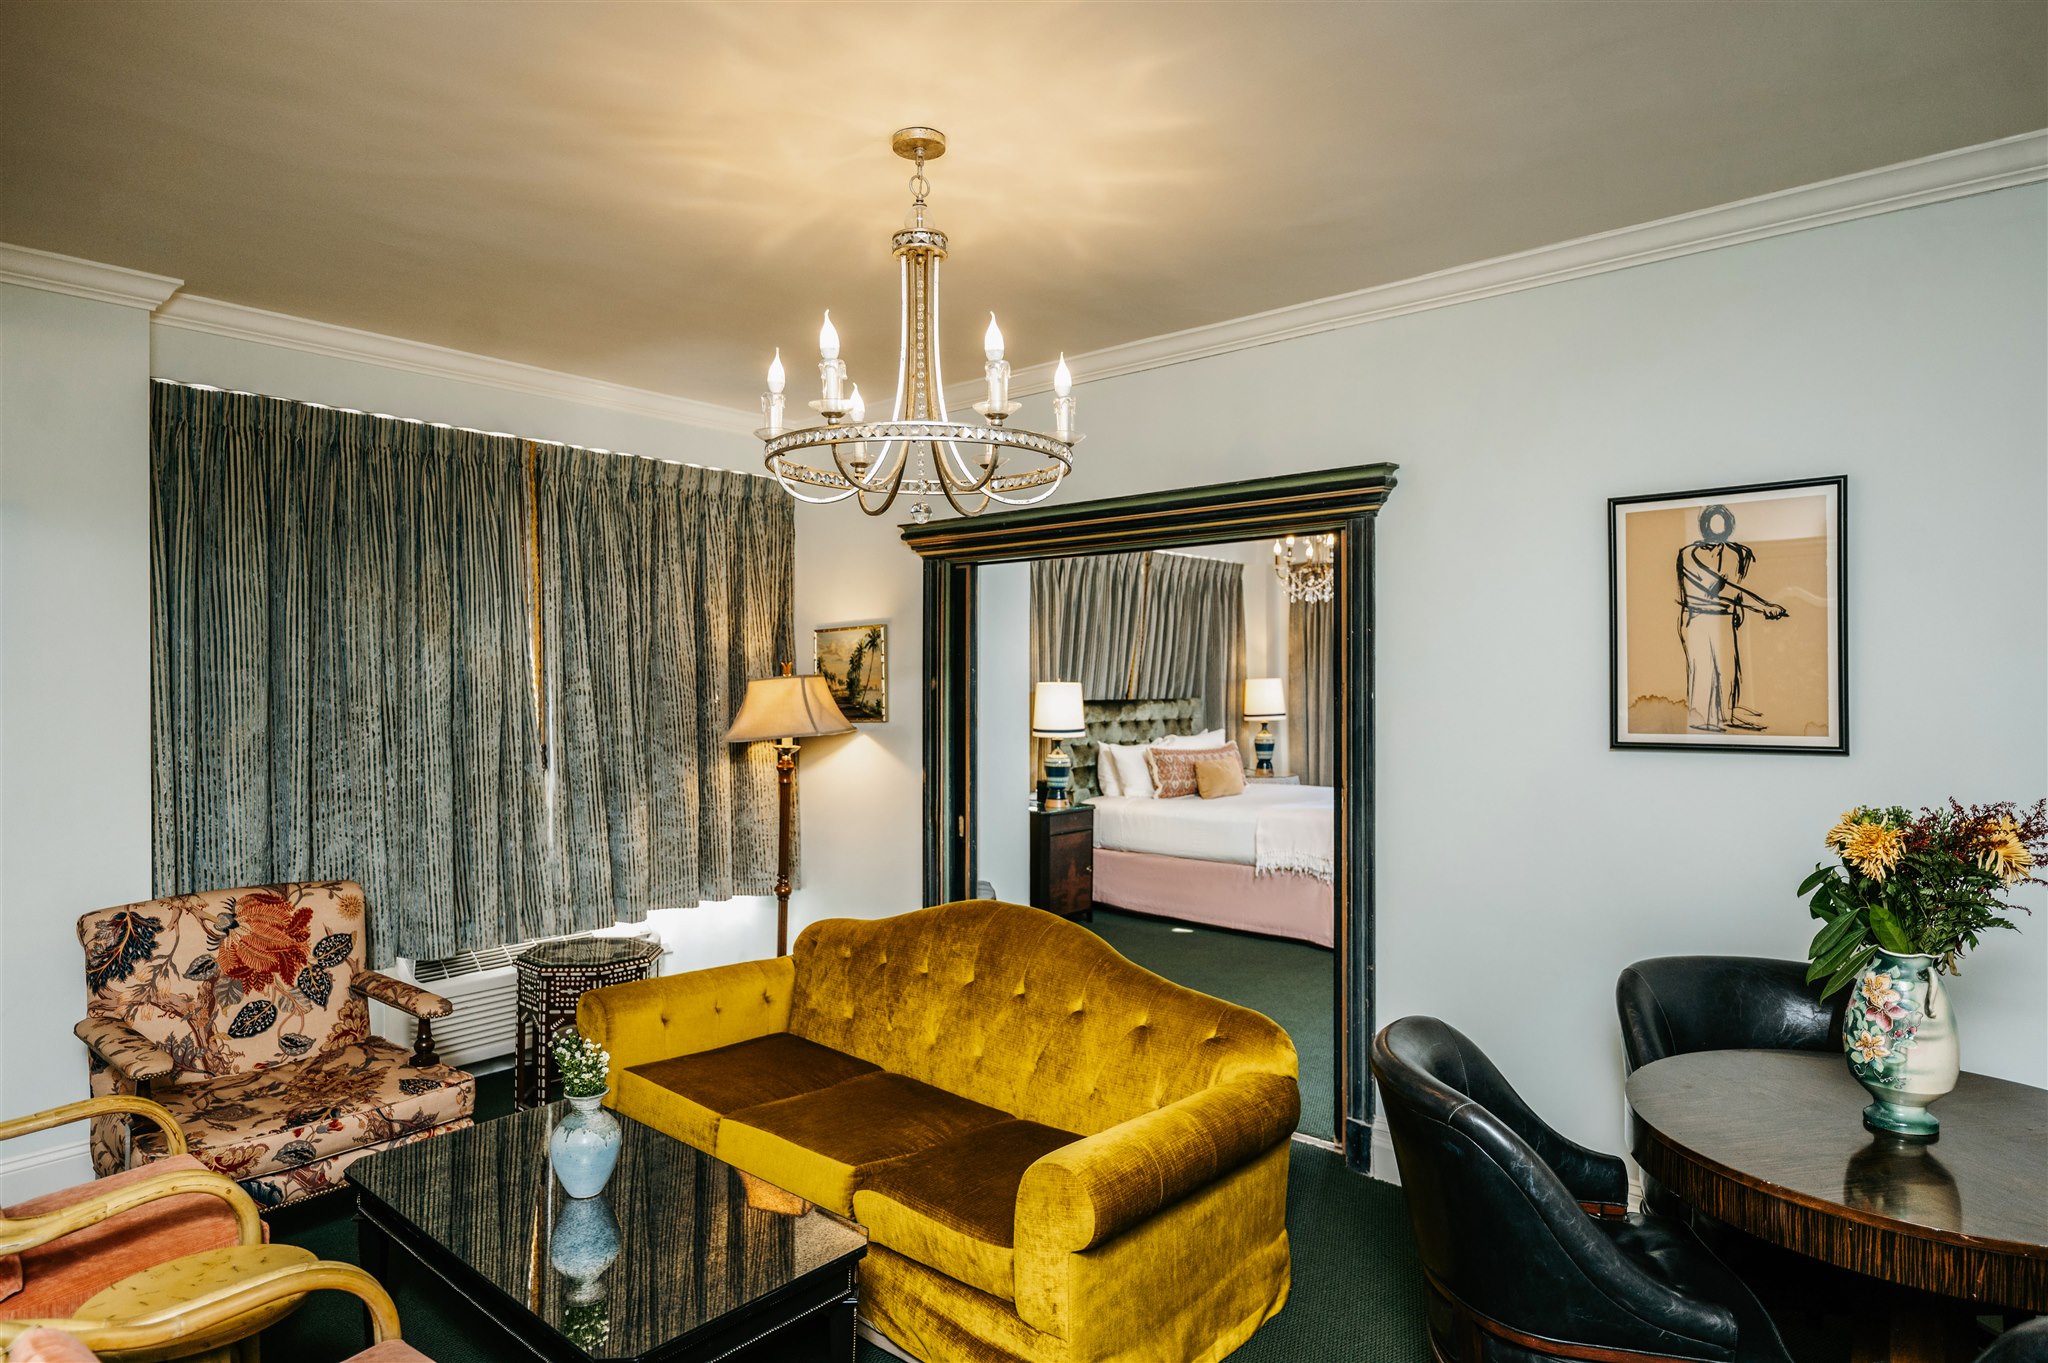 Pontchartrain Hotel guest room with yellow sofa